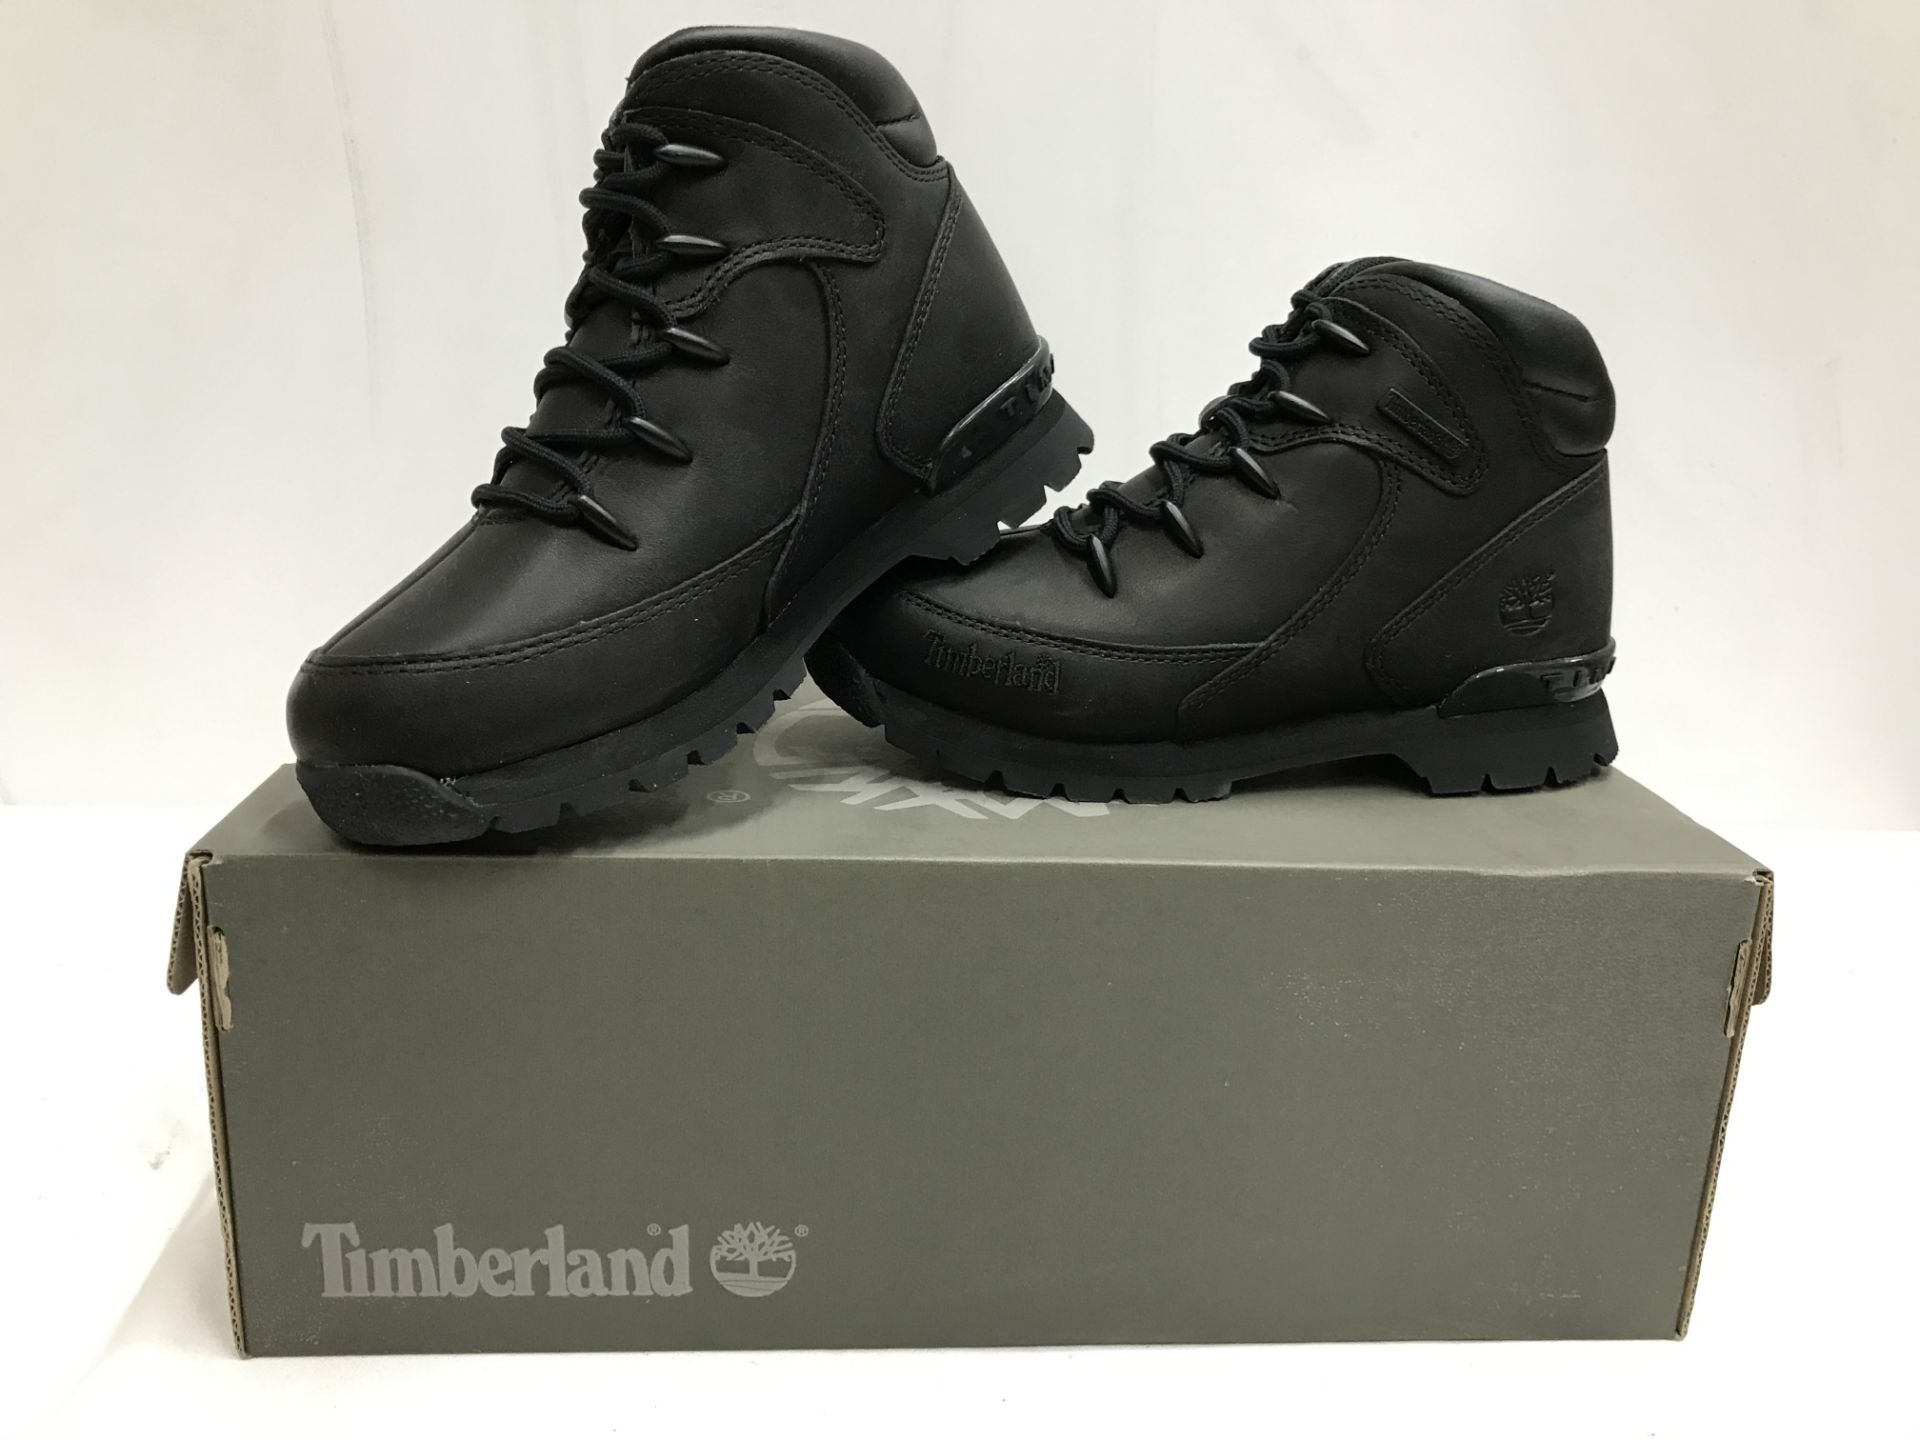 6 x Pairs of Timberland Junior's Boots